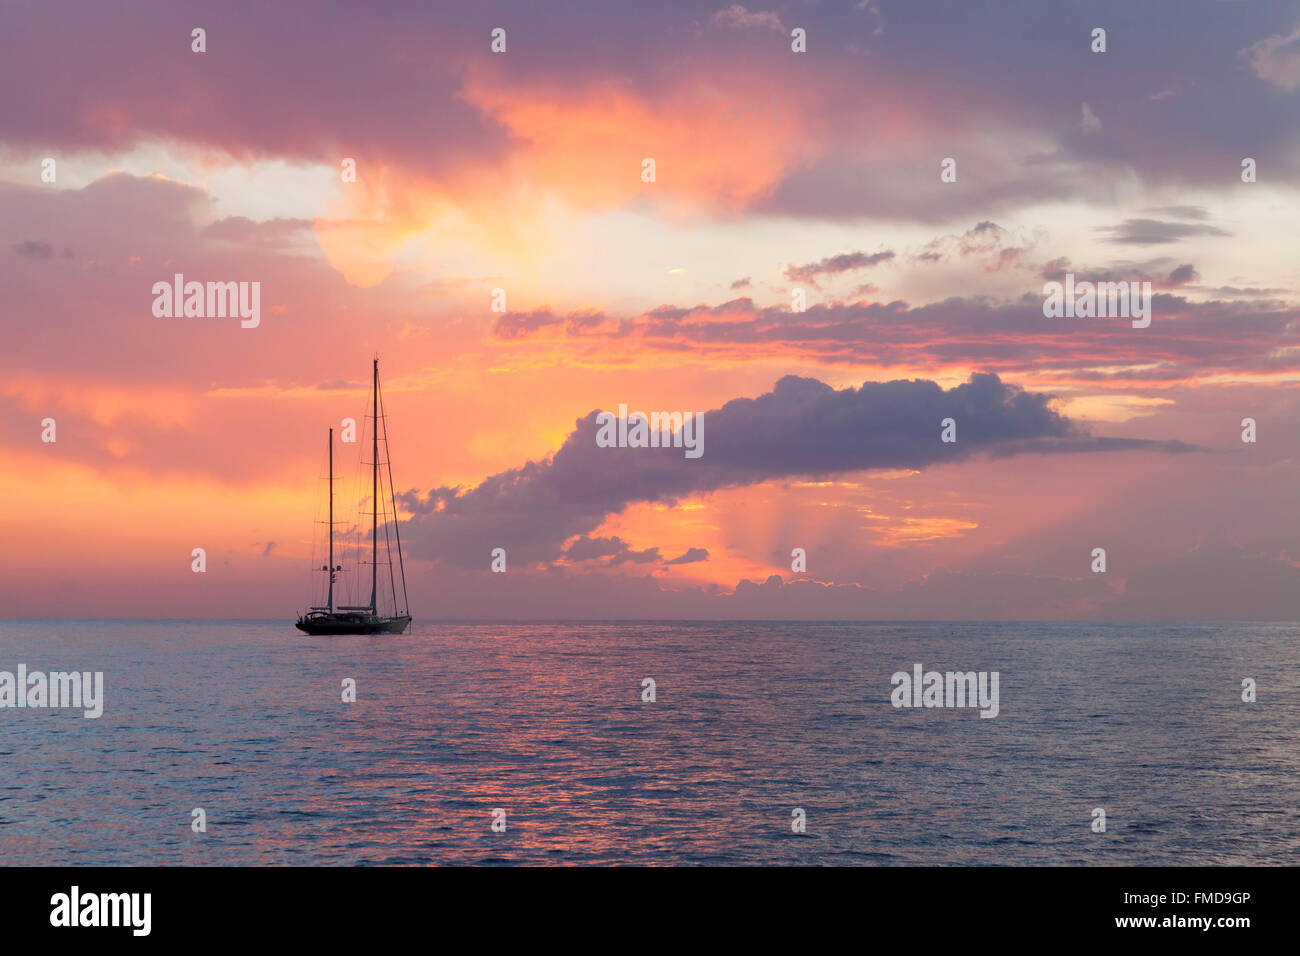 Sailboat at sunset off Tenerife, Canary Islands, Spain Stock Photo